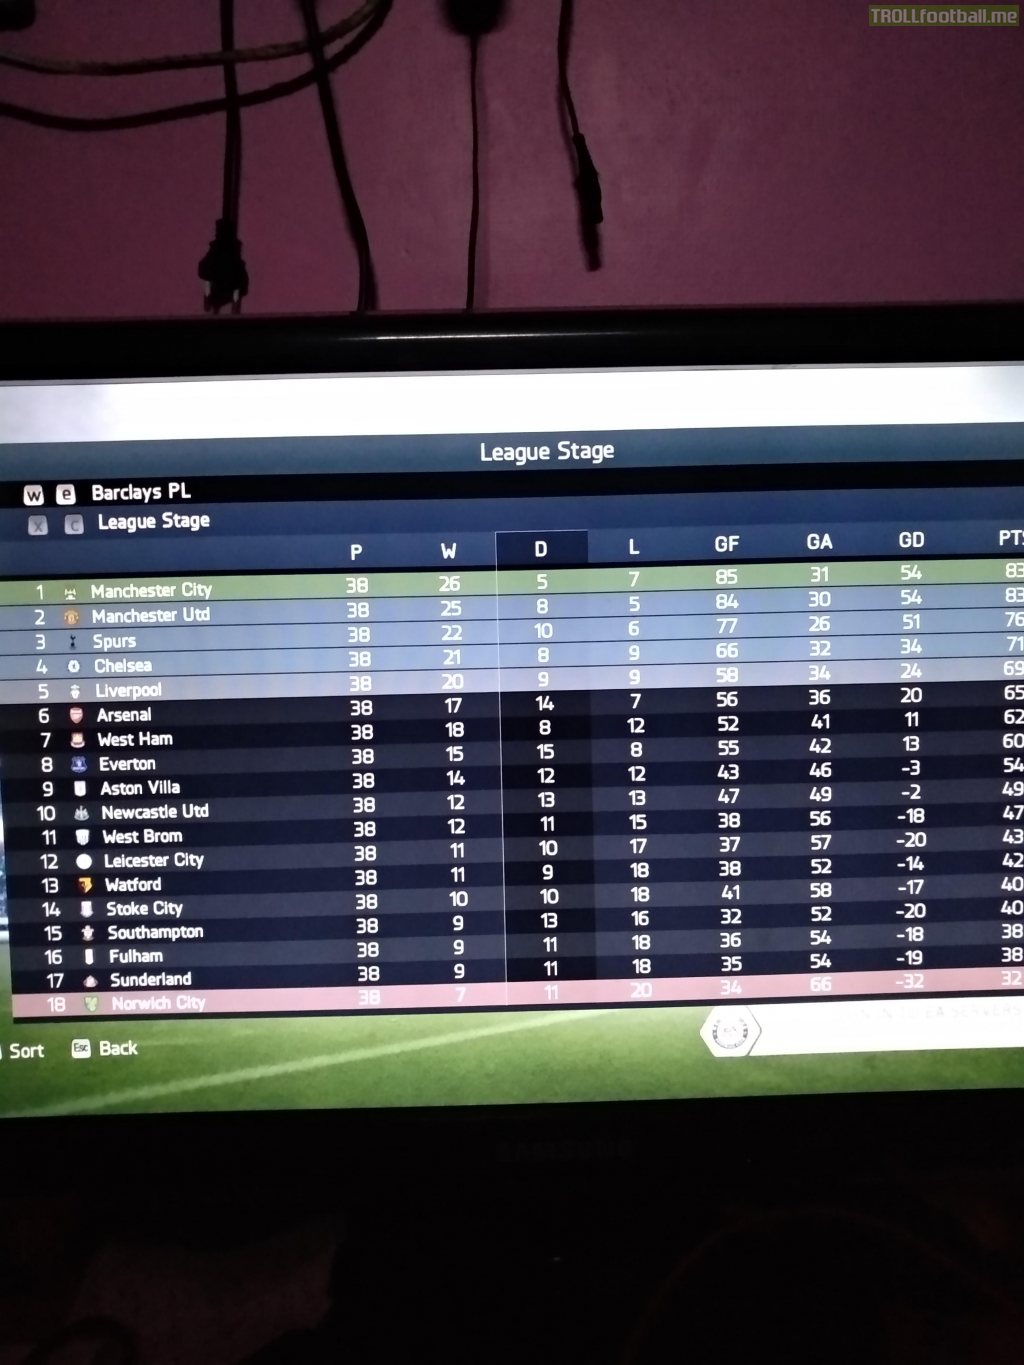 I played fifa 14 career mode with Manchester city and I won the league with same goal difference but more wins. I lost the last match against United.